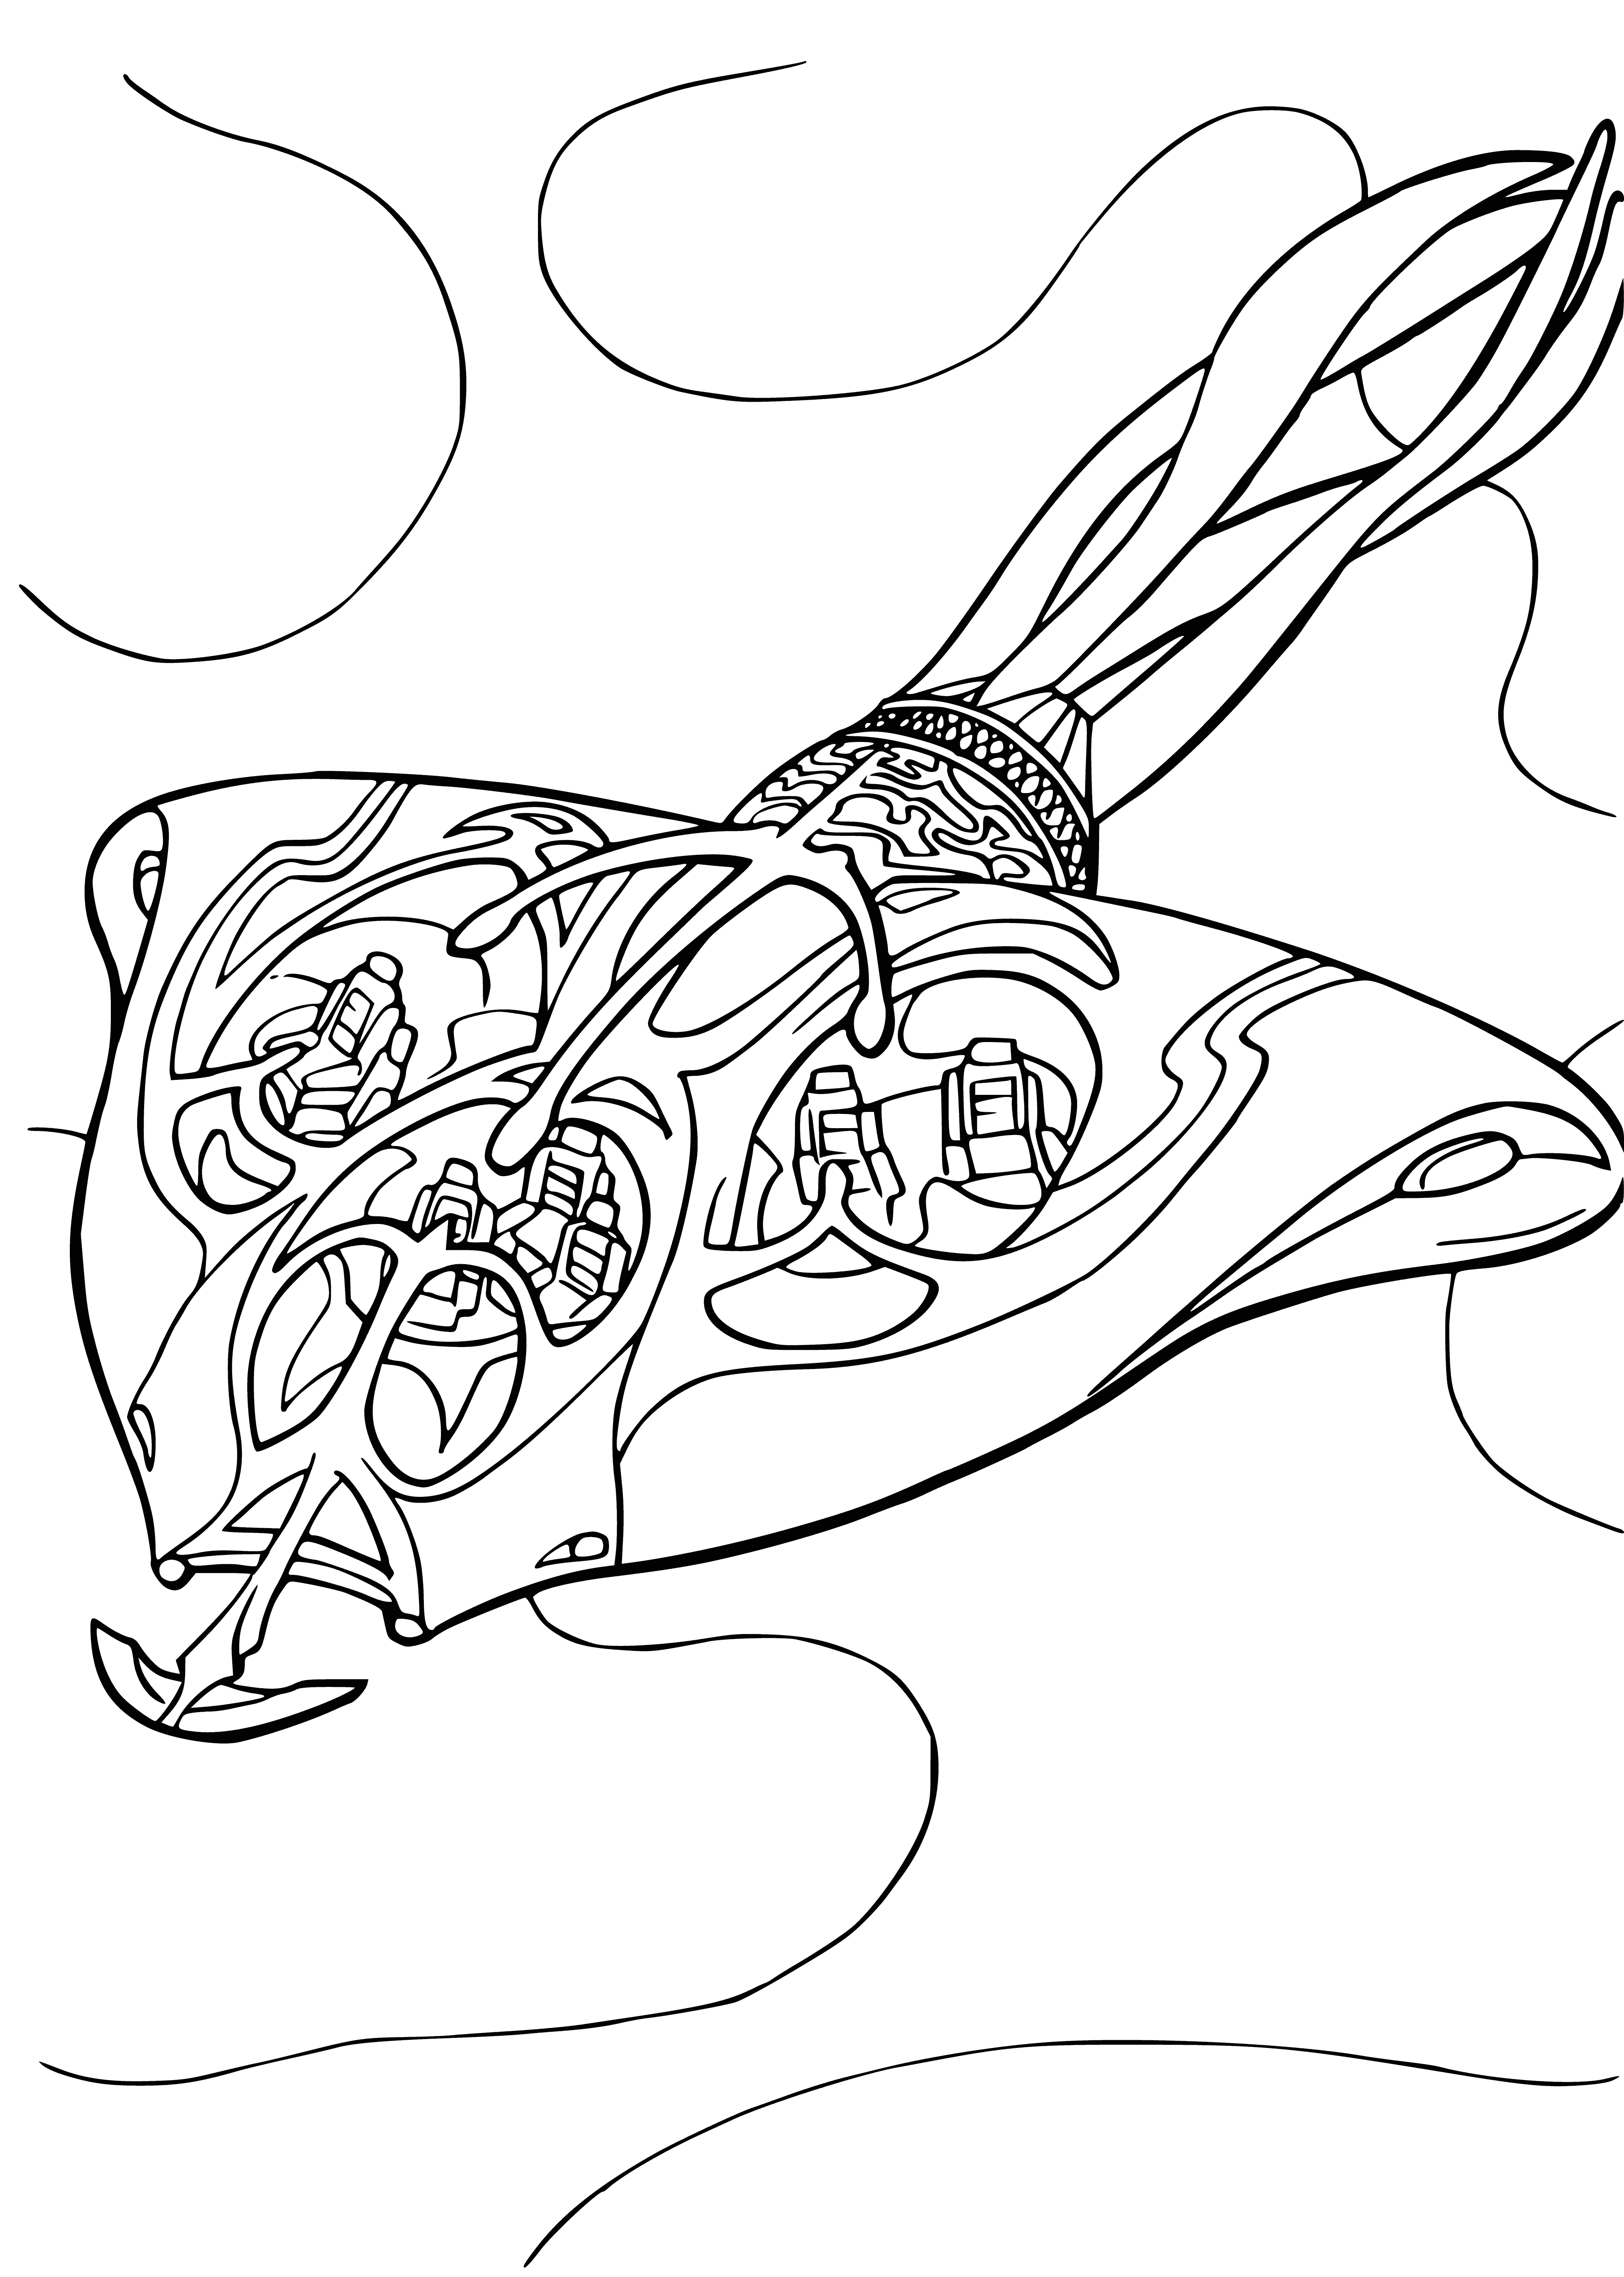 Underwater ship coloring page